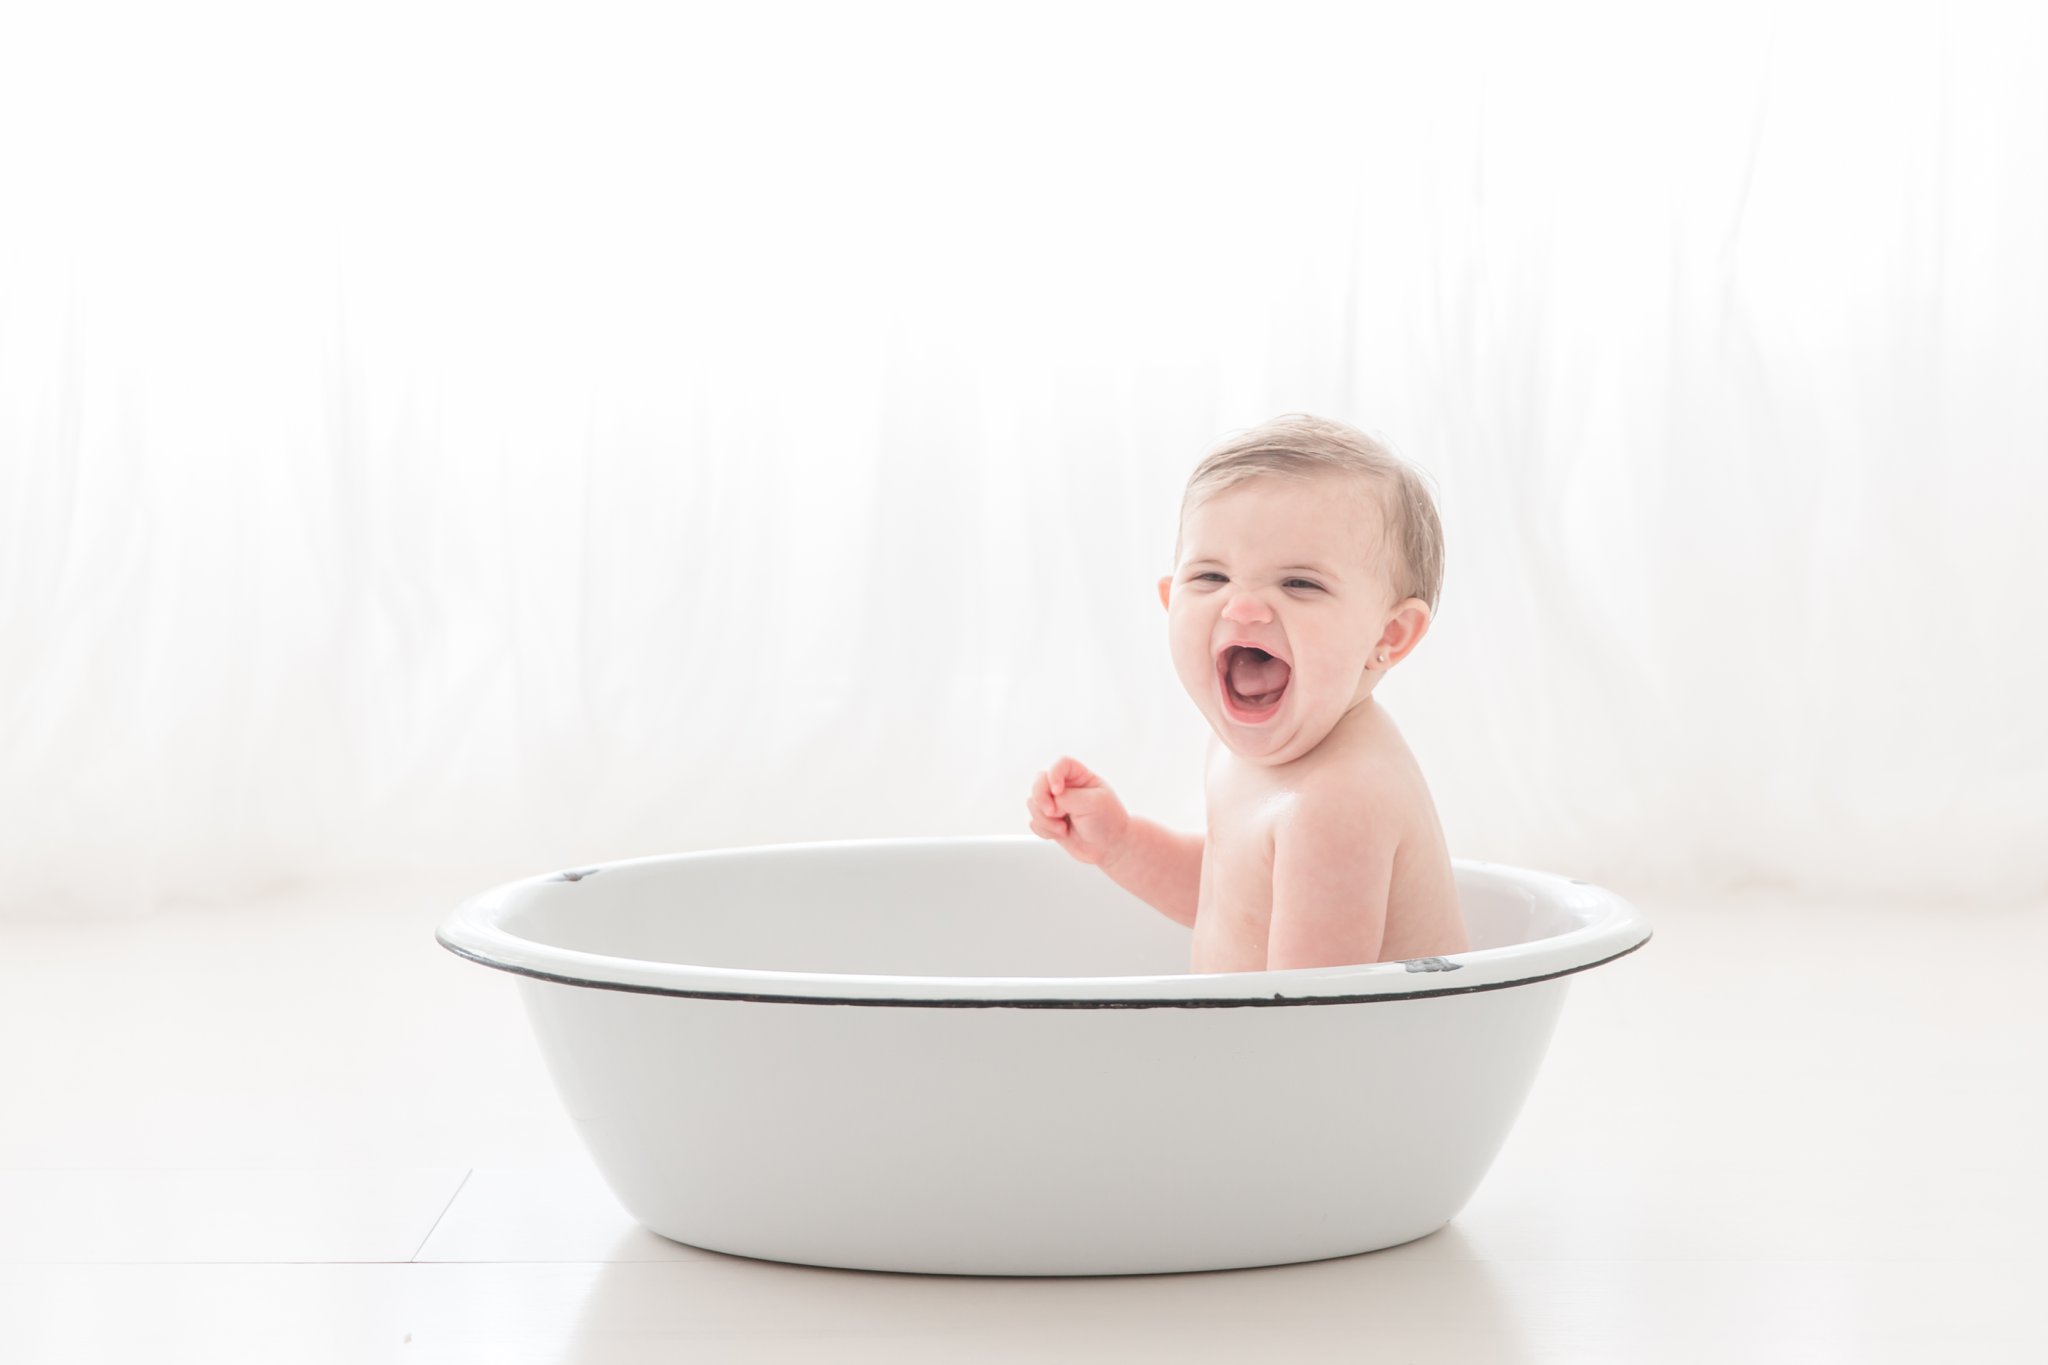 Baby playing in an antique wash basin in jupiter florida photo studio.  